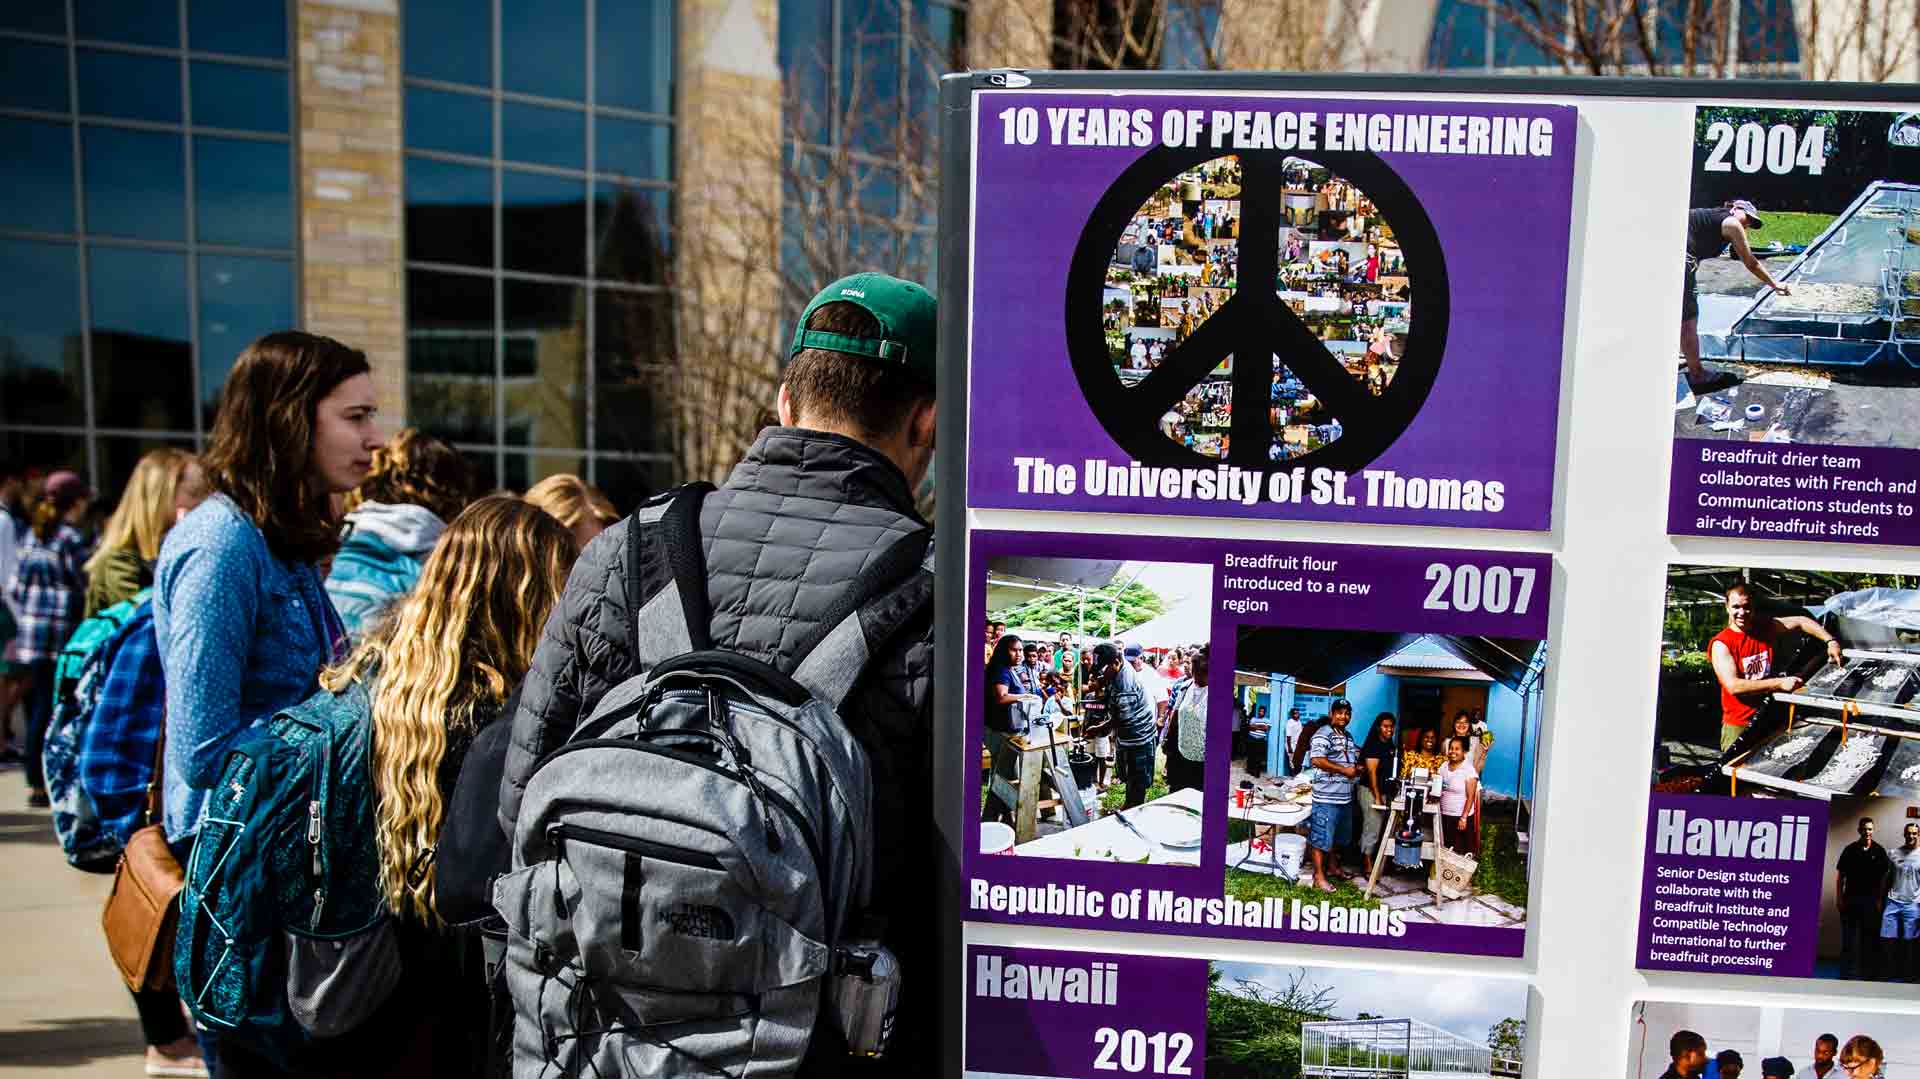 A display showing the peace engineering done by St. Thomas